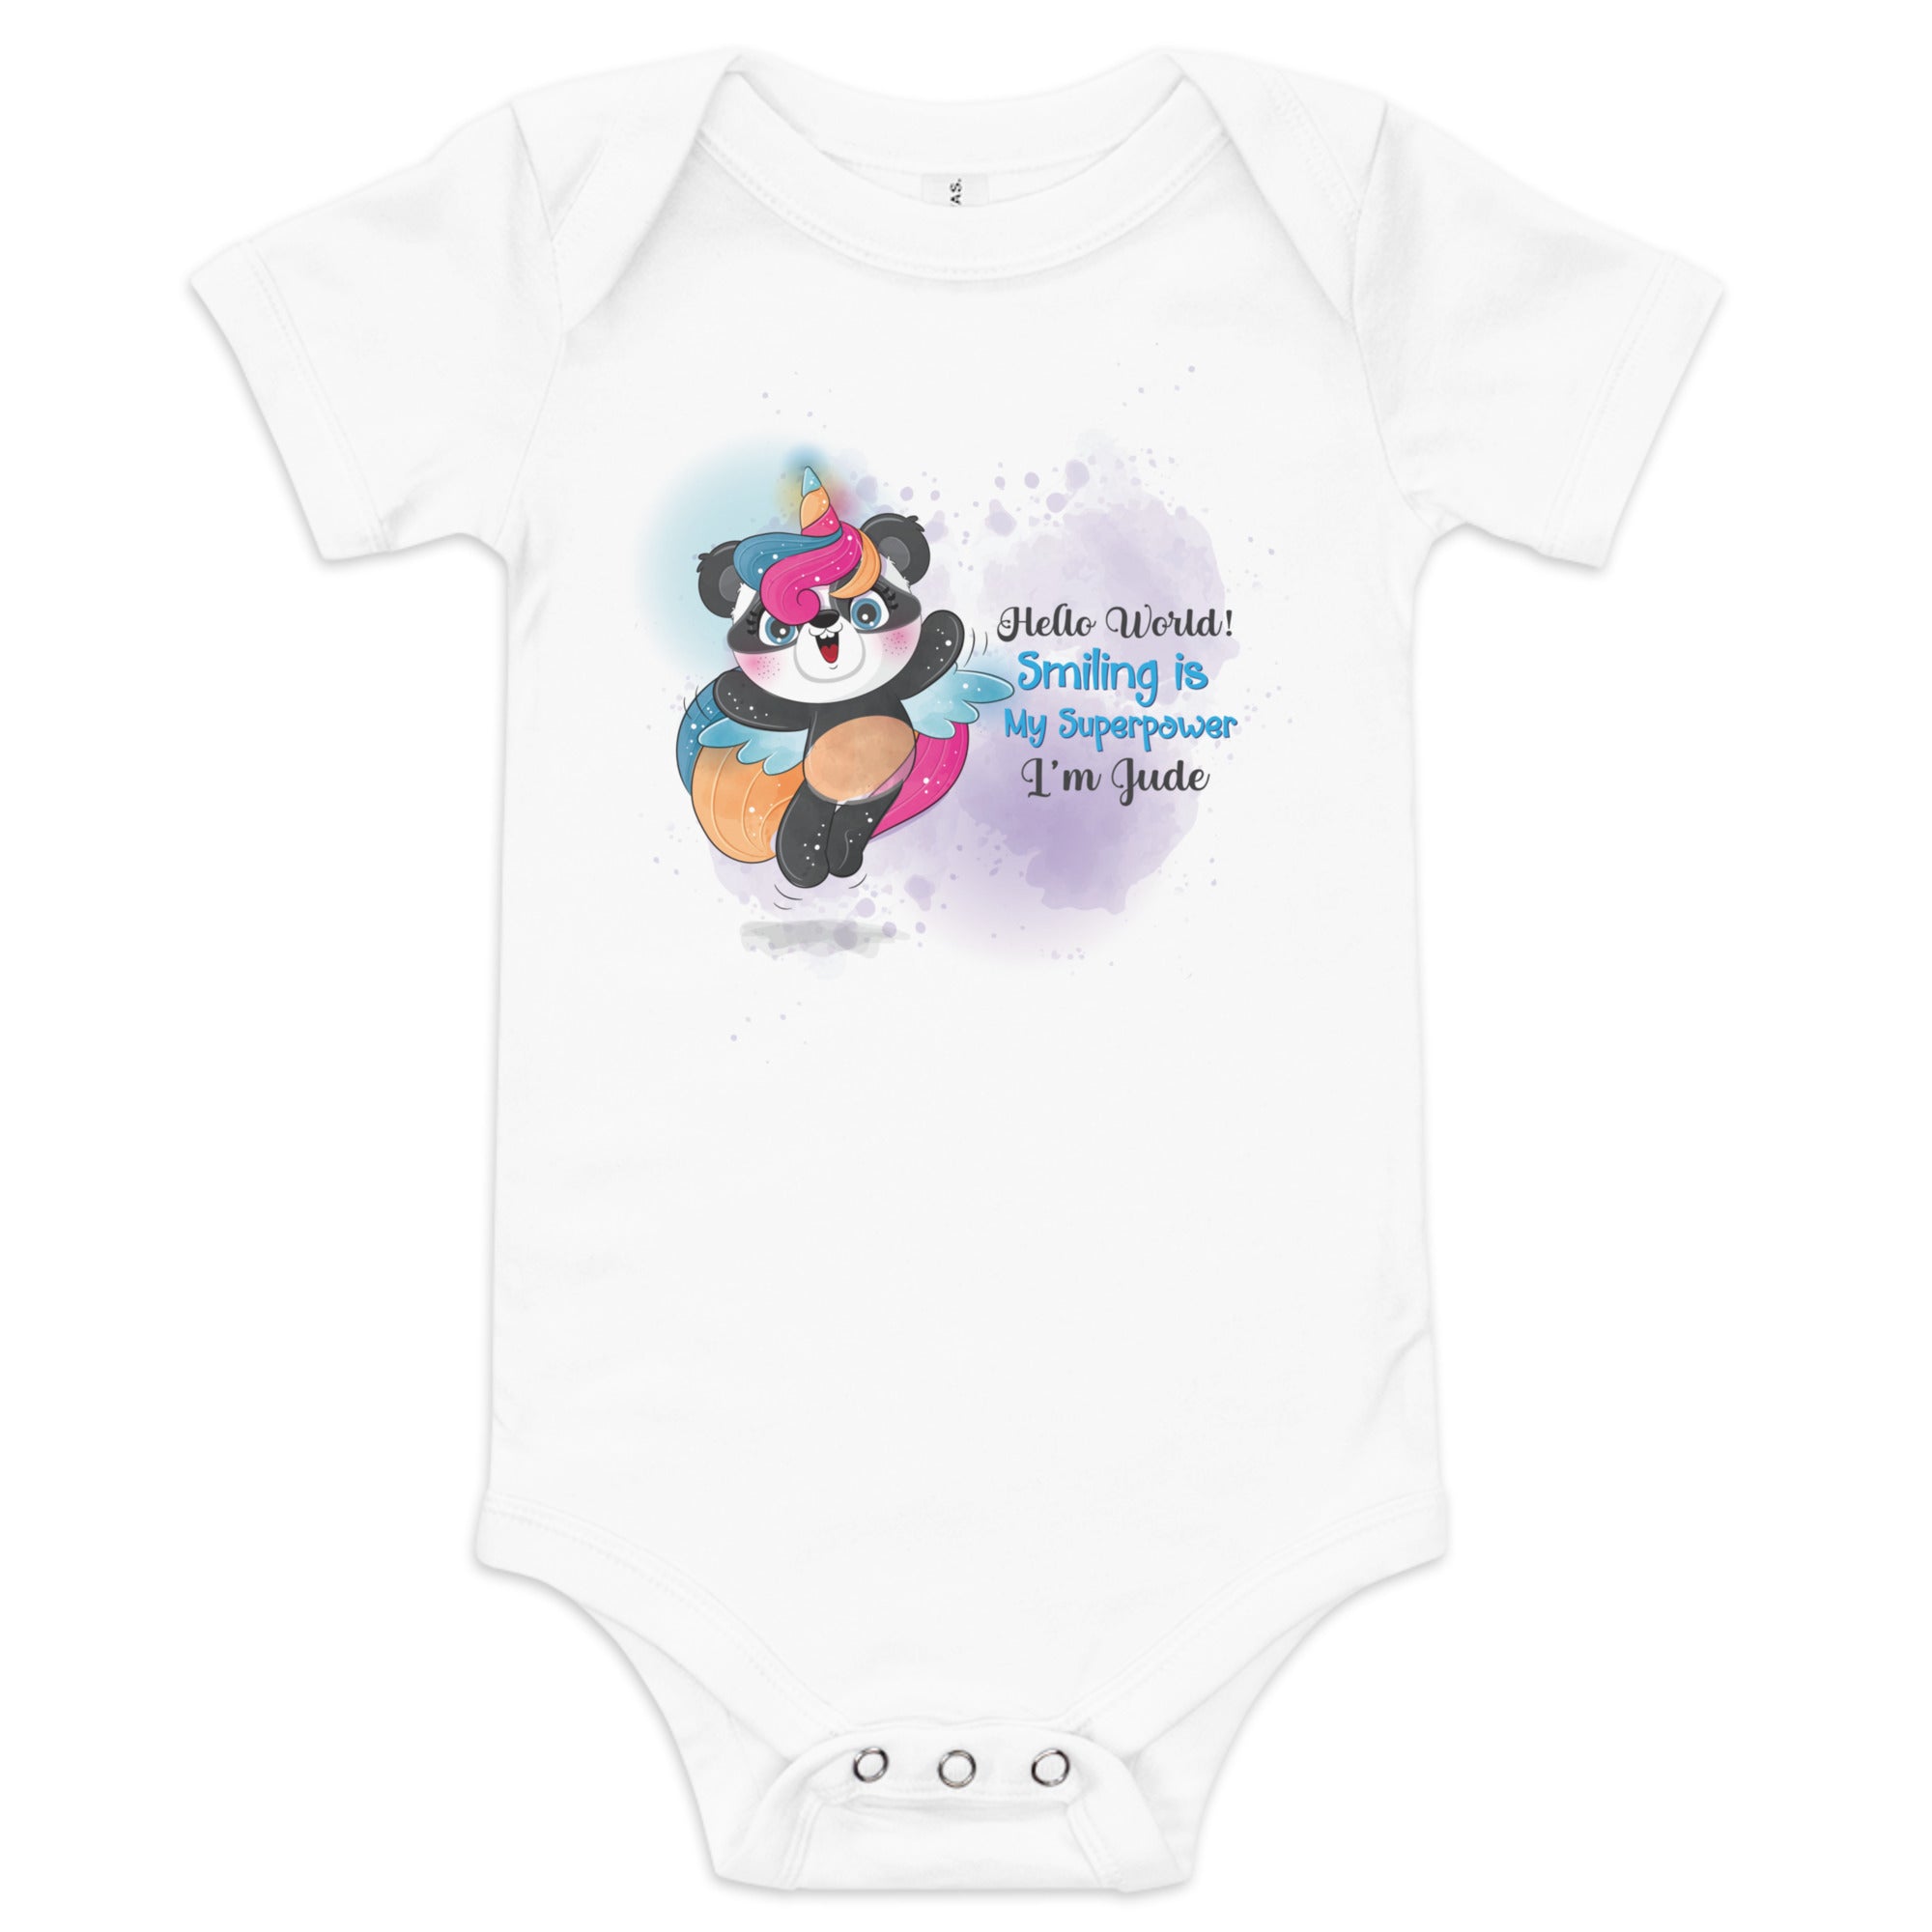 New Baby Gift Ideas, Baby Onesie with Positive Message